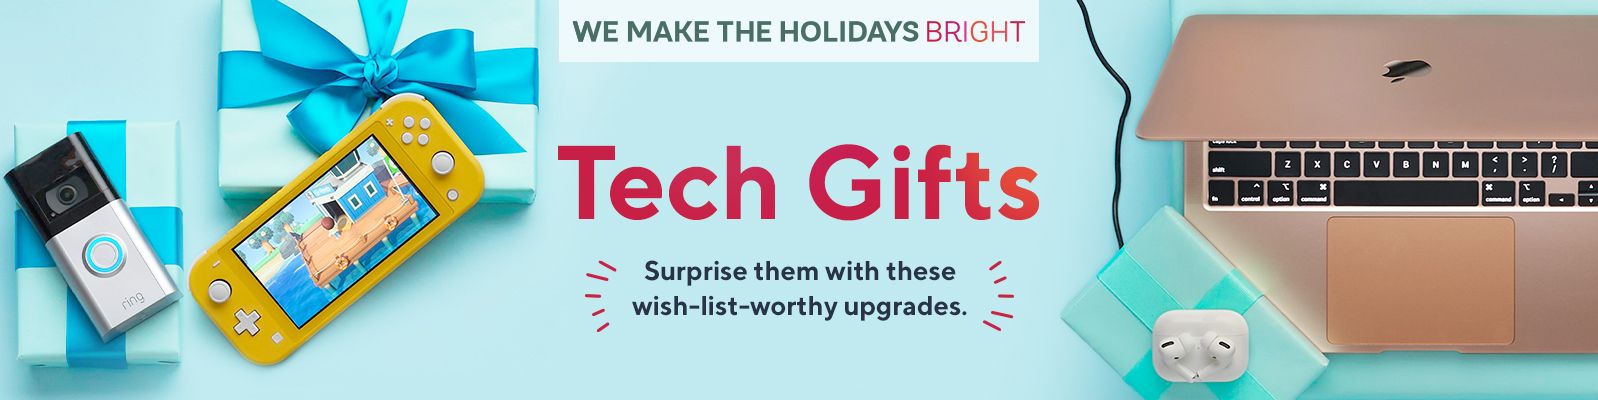 We Make the Holidays Bright.  Tech Gifts.  Surprise them with these wish-list-worthy upgrades.